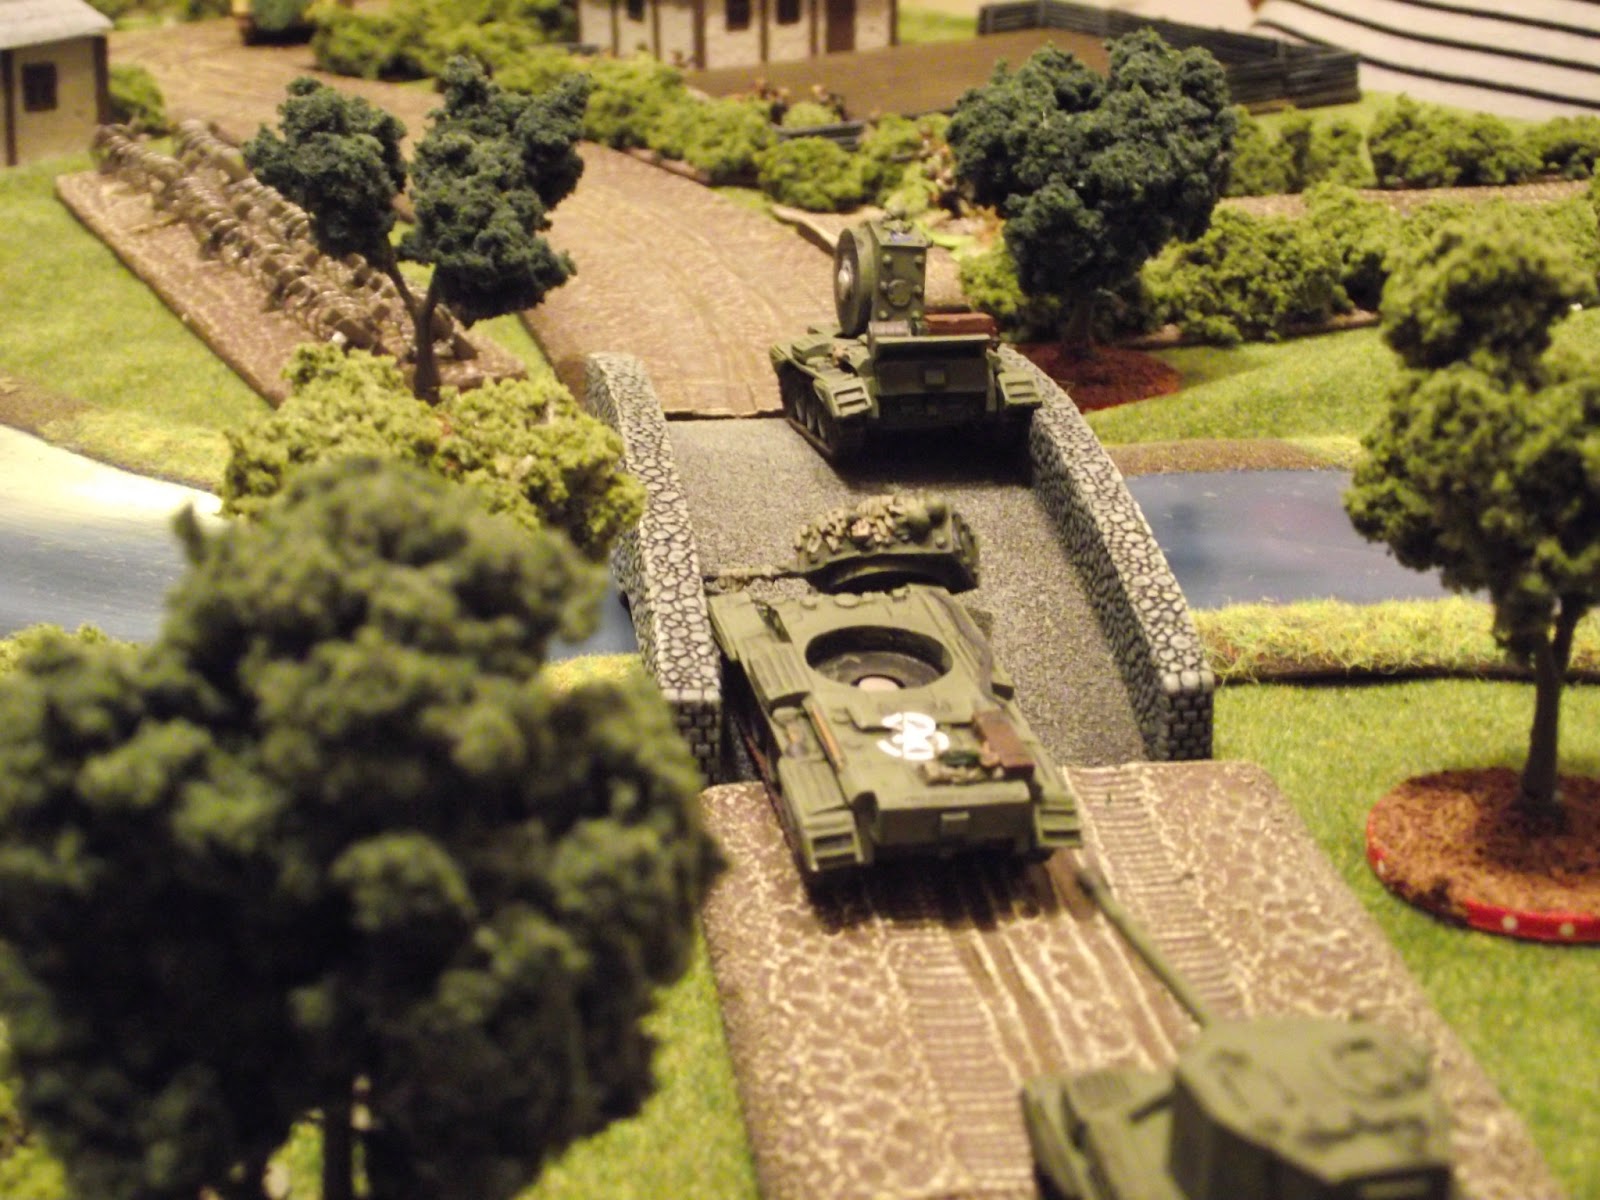  The PaK40 takes out the secondCromwell on a great shot. 